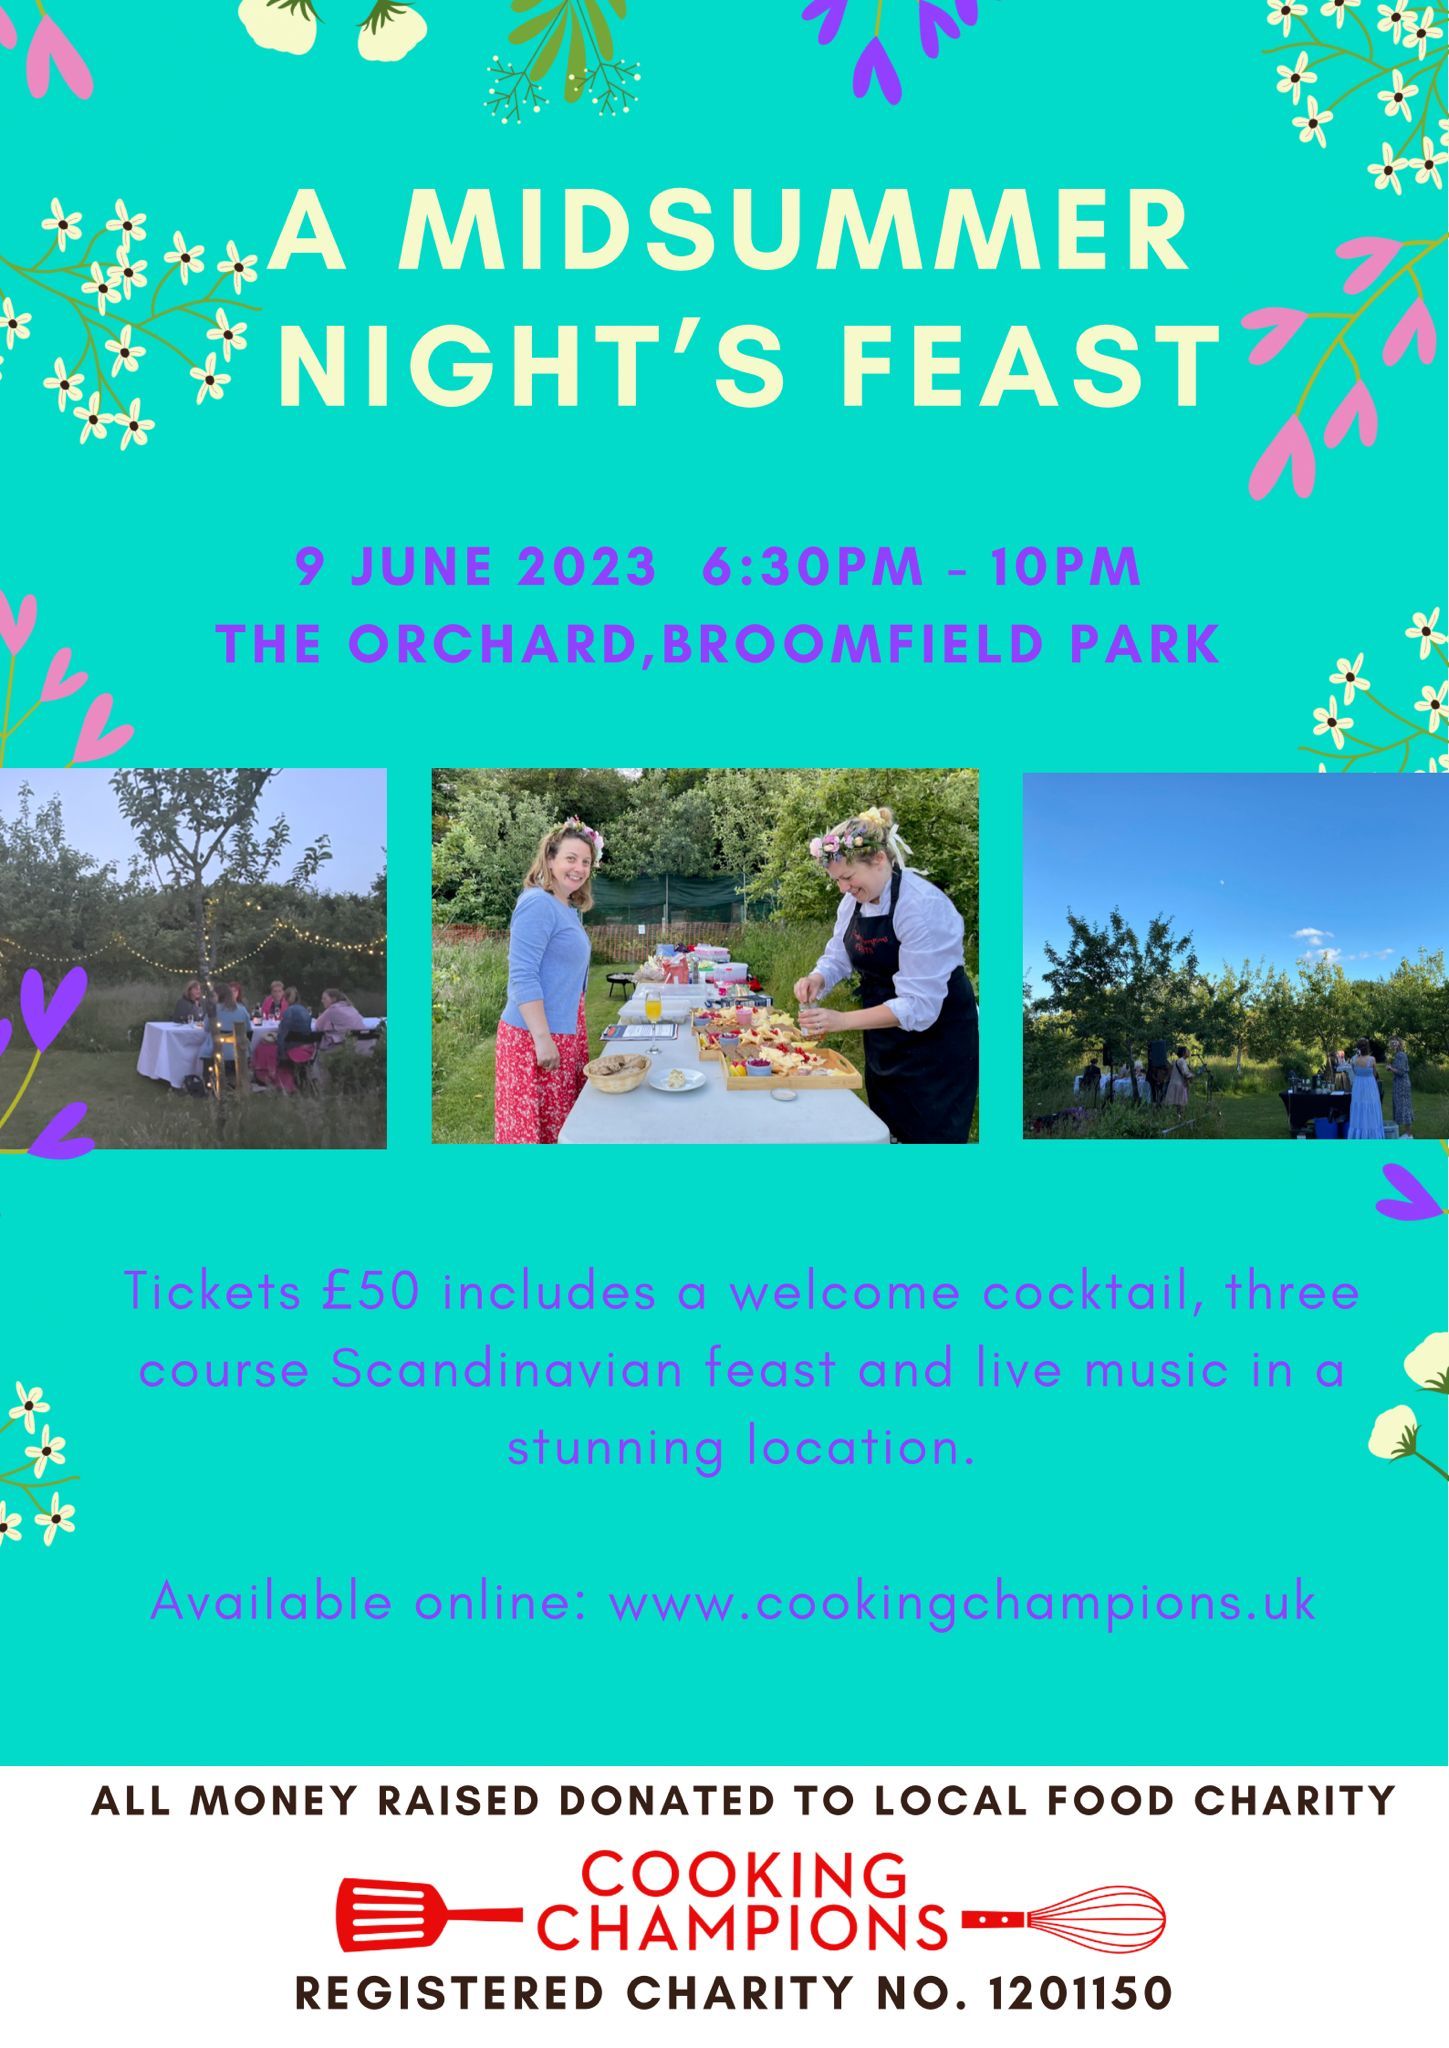 A poster for a midsummer night 's feast at the orchard broomfield park